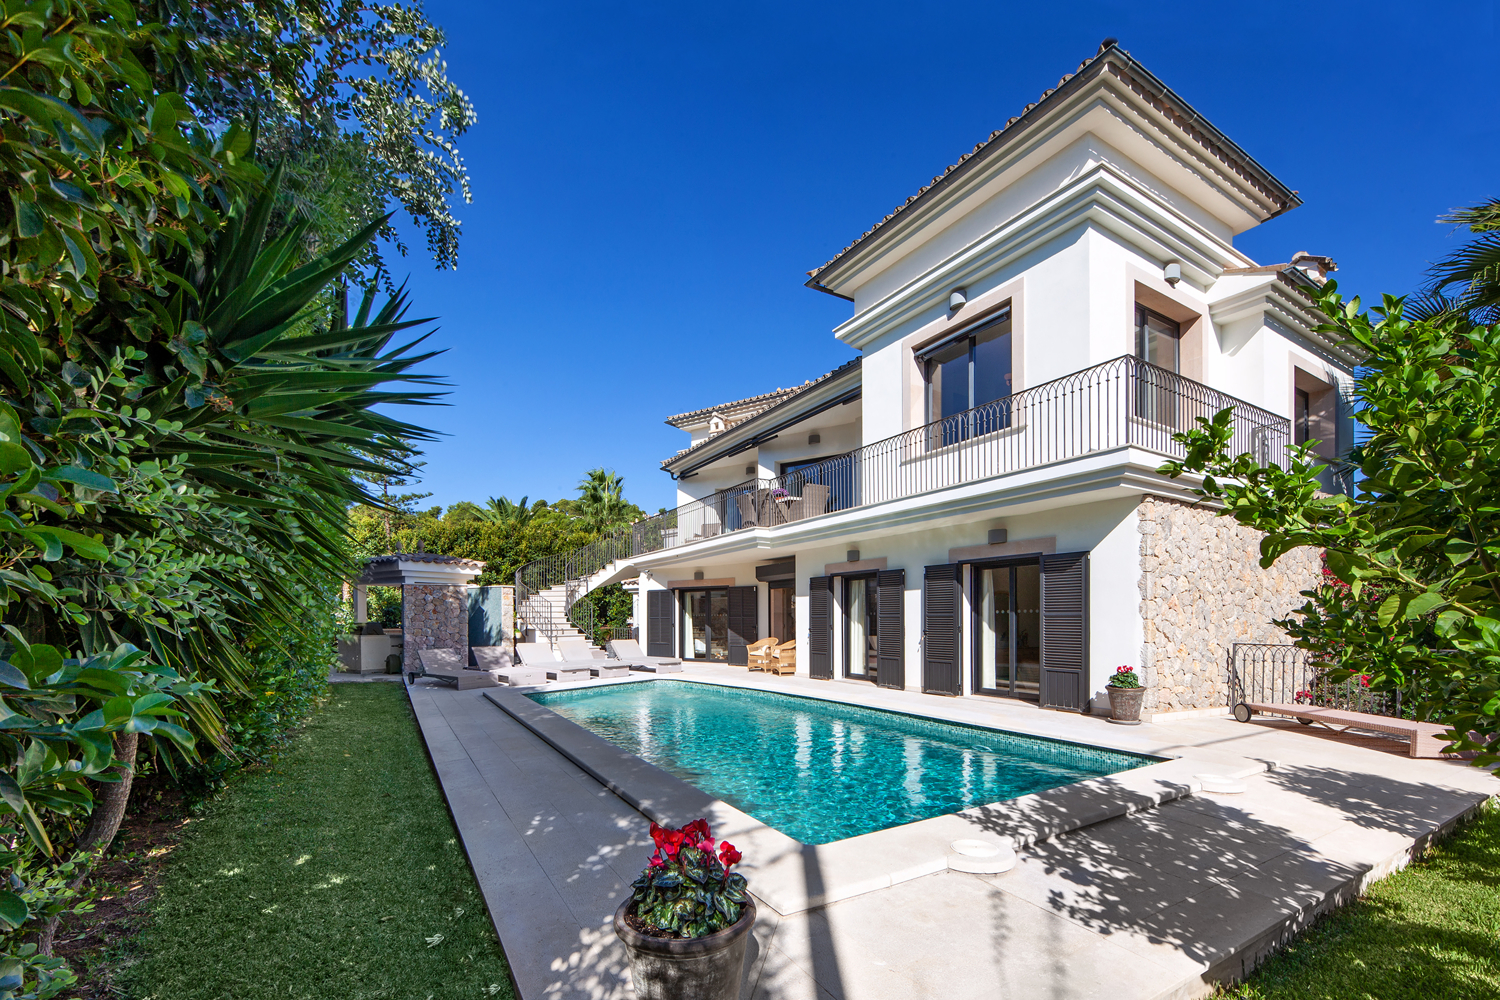 Glamourous VILLA with saltwater POOL and BBQ area within walking distance to the PORT